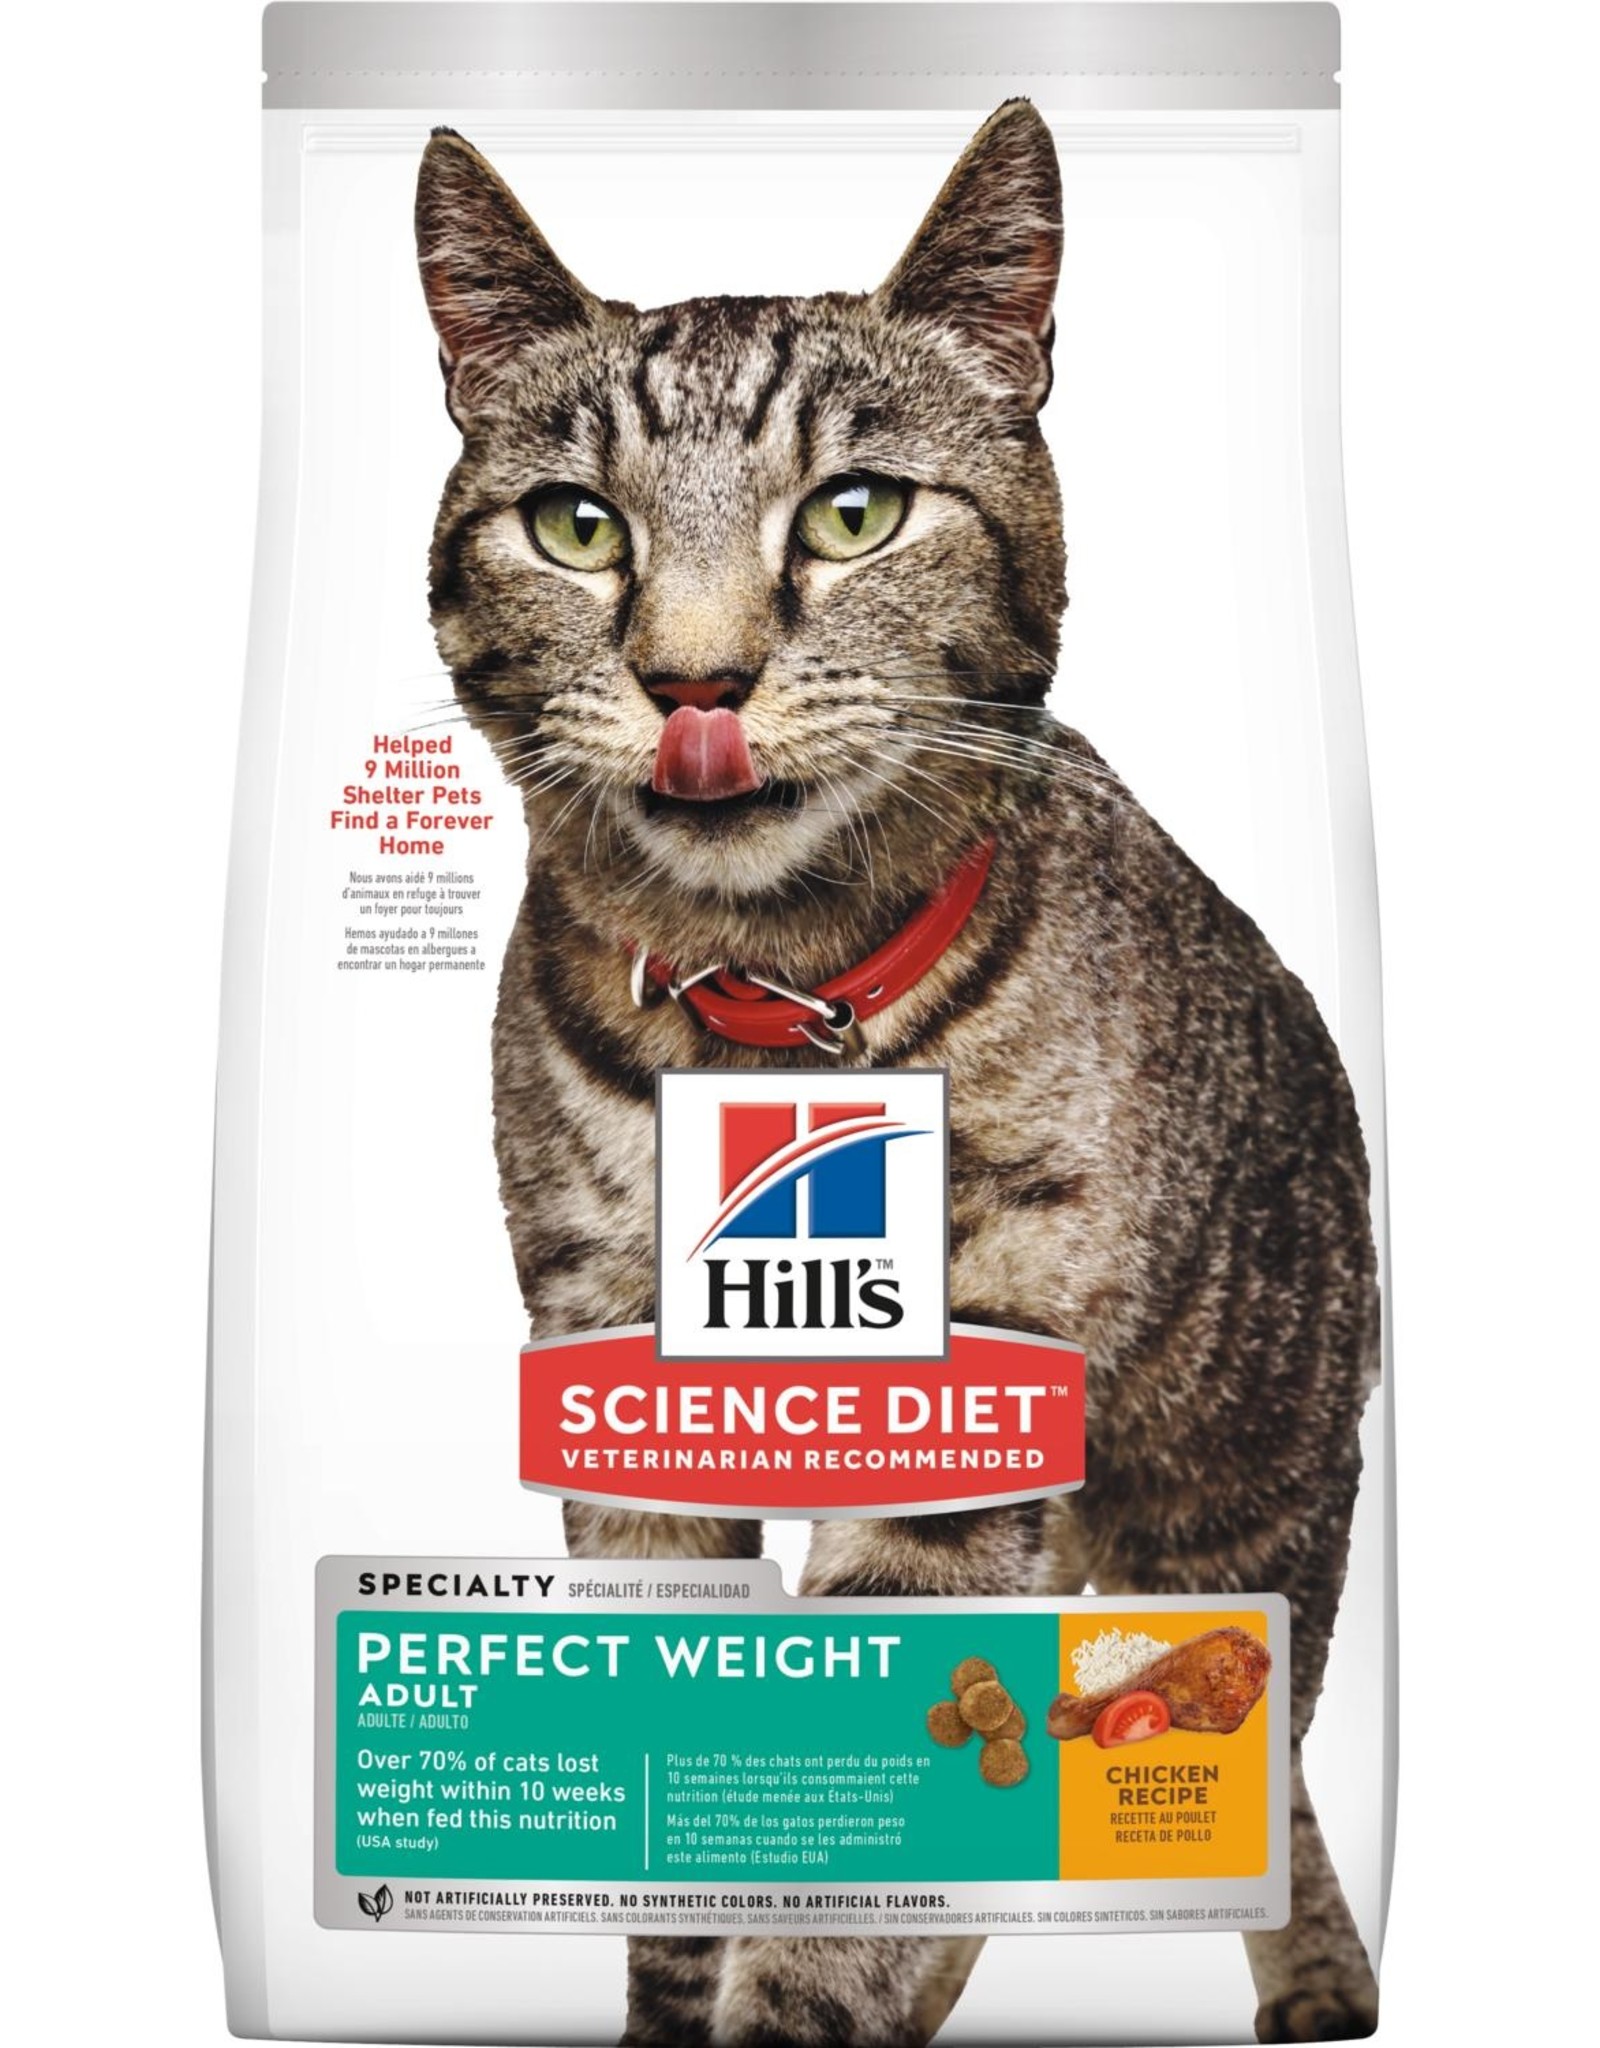 SCIENCE DIET HILL'S SCIENCE DIET FELINE ADULT PERFECT WEIGHT 7LBS